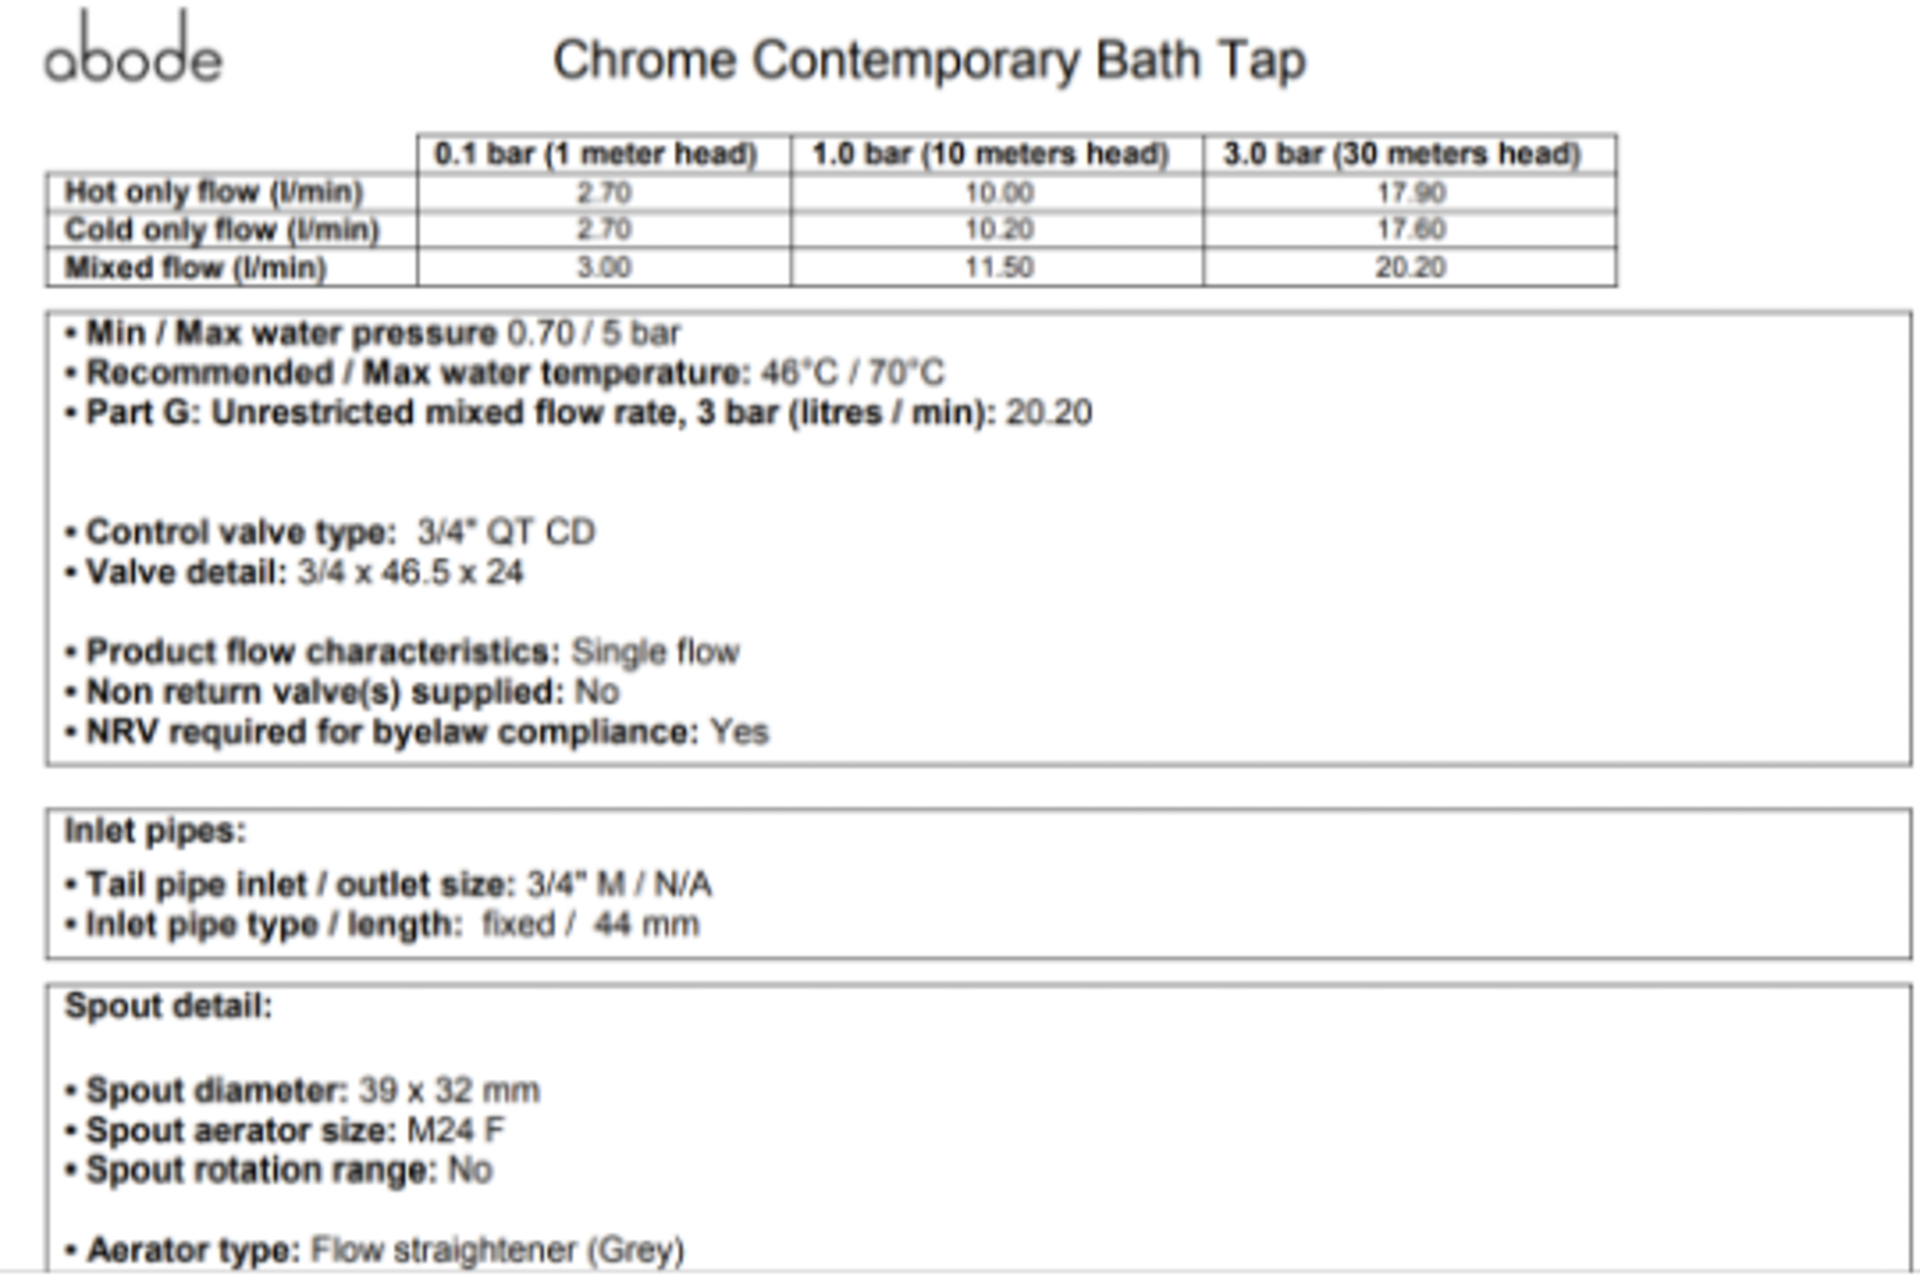 2 x NEW BOXED Abode Lamona CONTEMPORARY CHROME BATH TAPS. RRP £129.99 EACH, GIVING THIS LOT A - Image 4 of 4